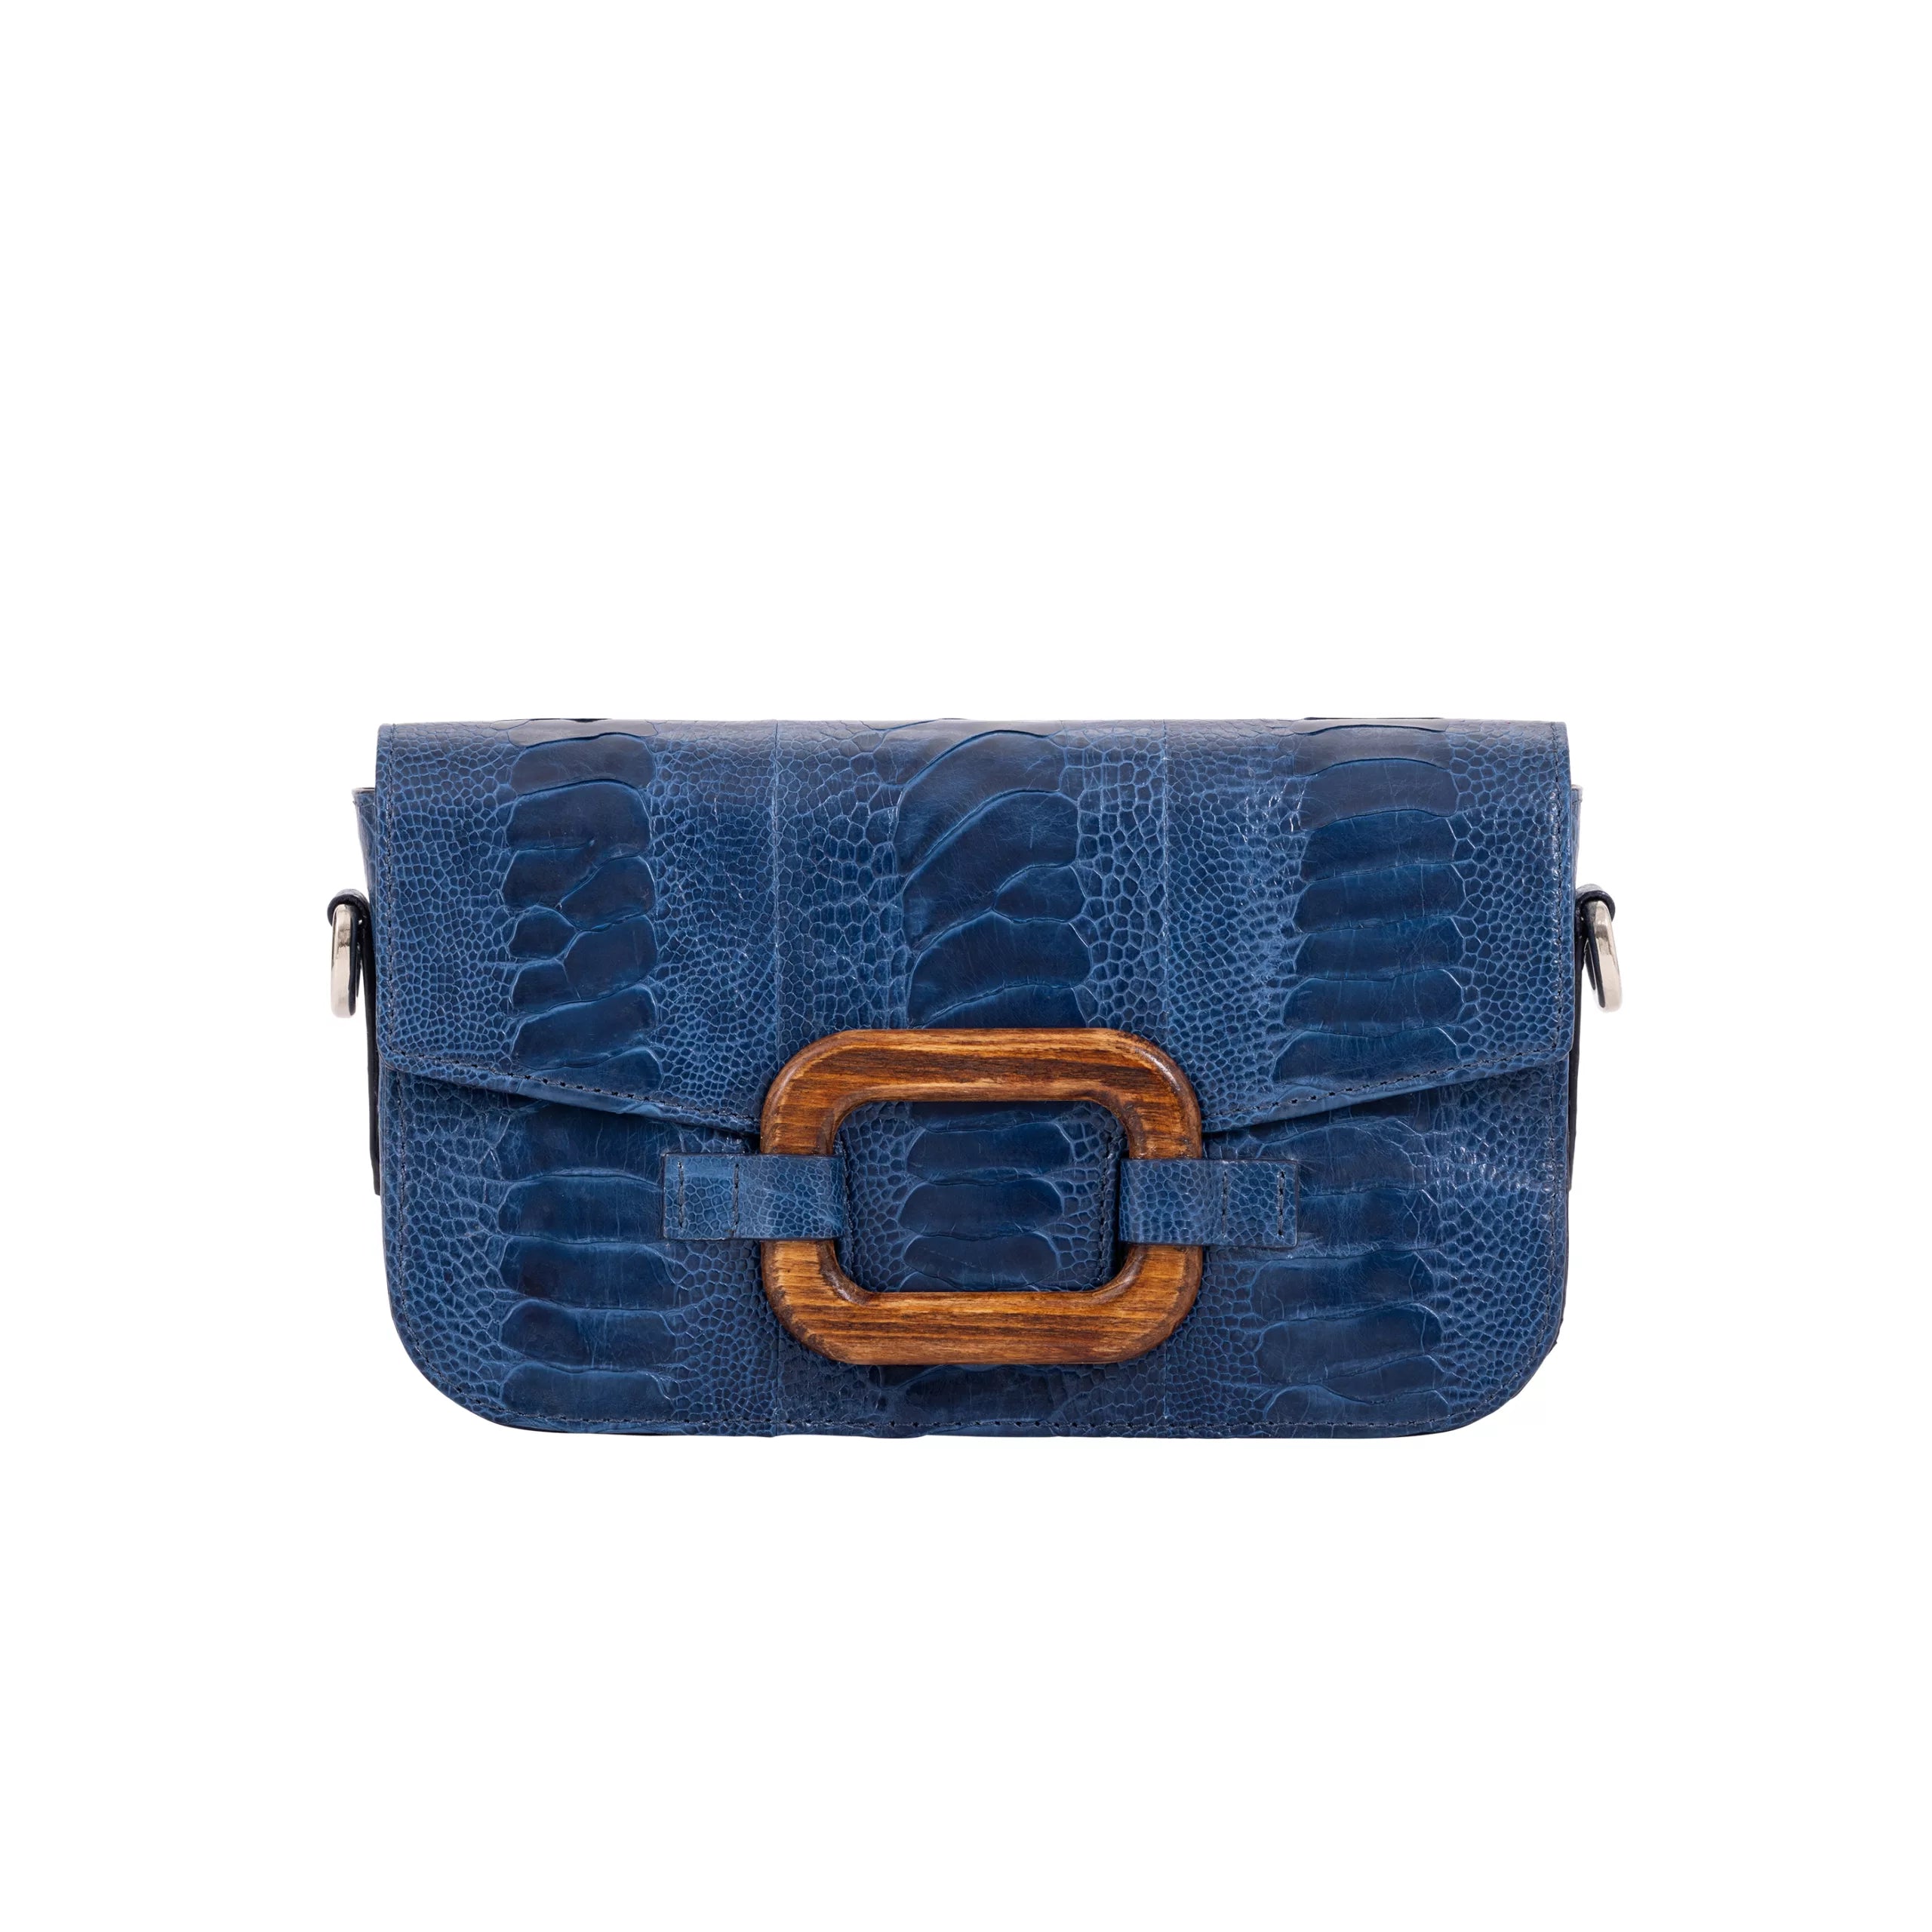 Deya Crossbody in Teal Ostrich Leg with a Wood Ring Detail by Cape Cobra